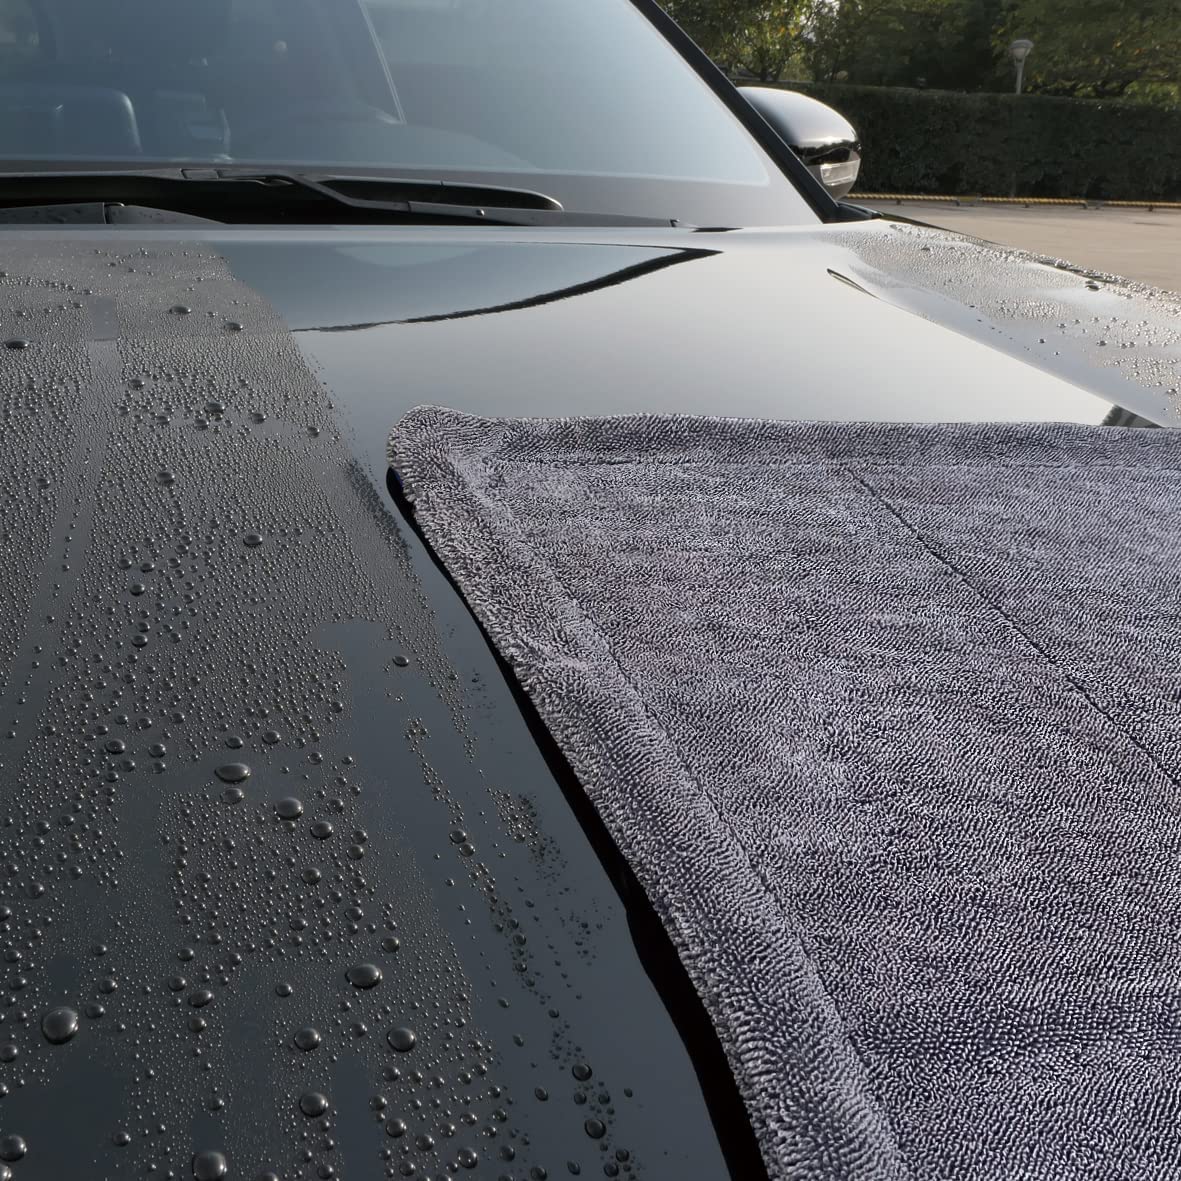 Auto Hub Heavy Microfiber Cloth for Car Cleaning and Detailing, Double Sided, Extra Thick Plush Microfiber Towel Lint-Free, 1200 GSM